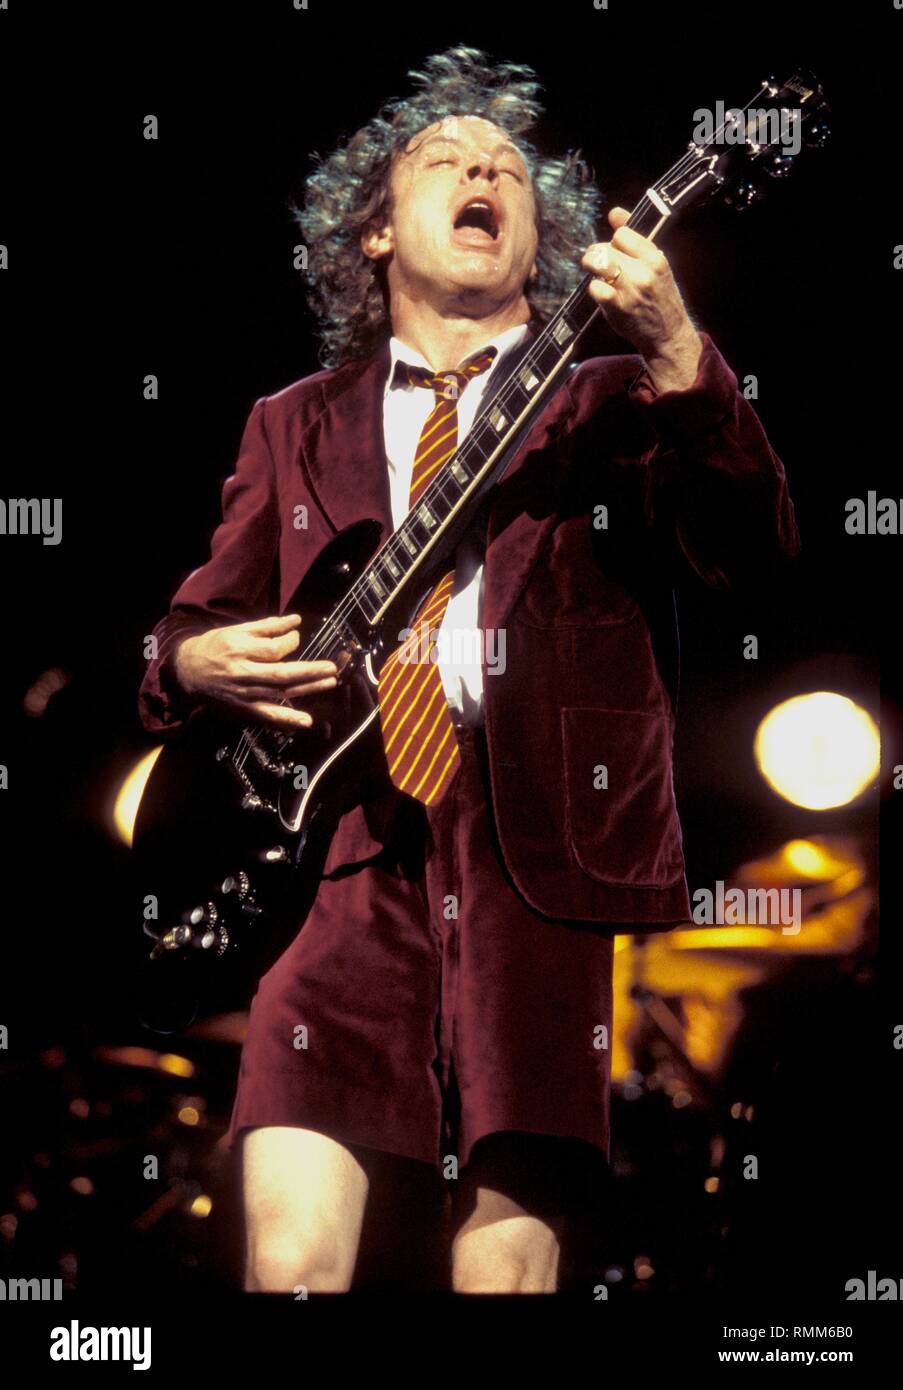 Ac/Dc guitarist Angus Young is shown performing on stage during a 'live' concert appearance. Stock Photo